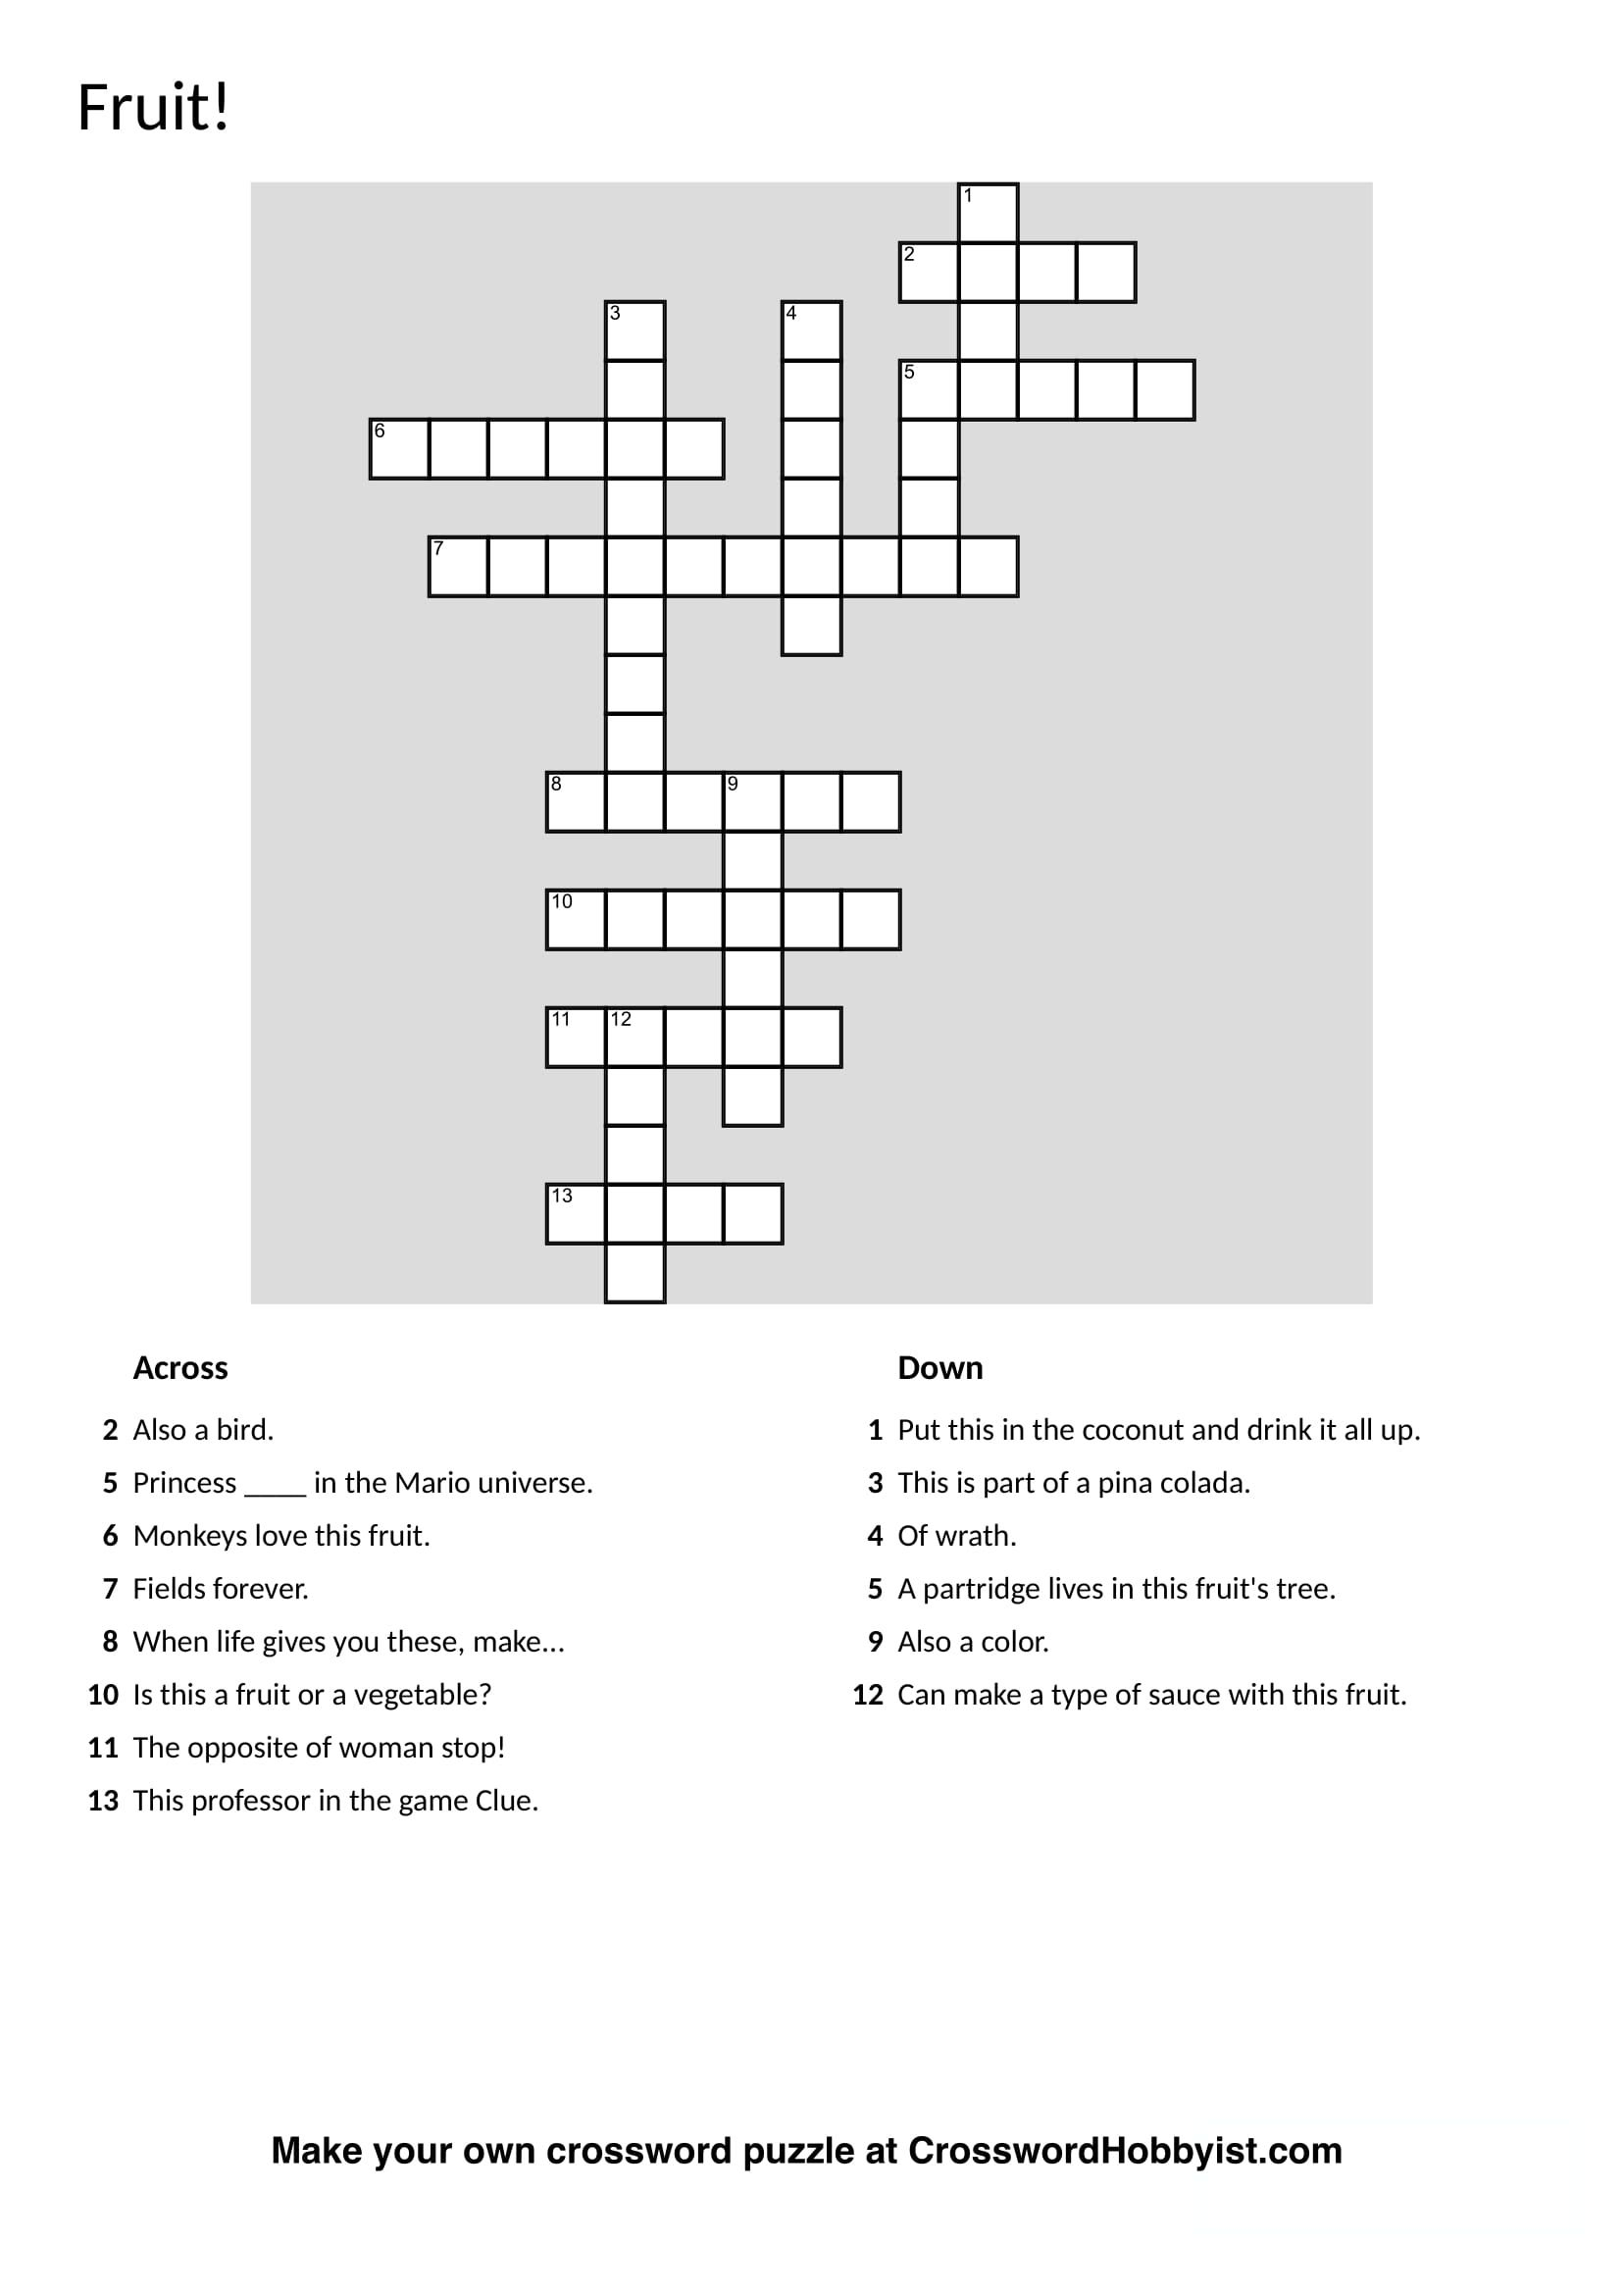 Make Your Own Fun Crossword Puzzles With Crosswordhobbyist - Create Your Own Crossword Puzzle Printable